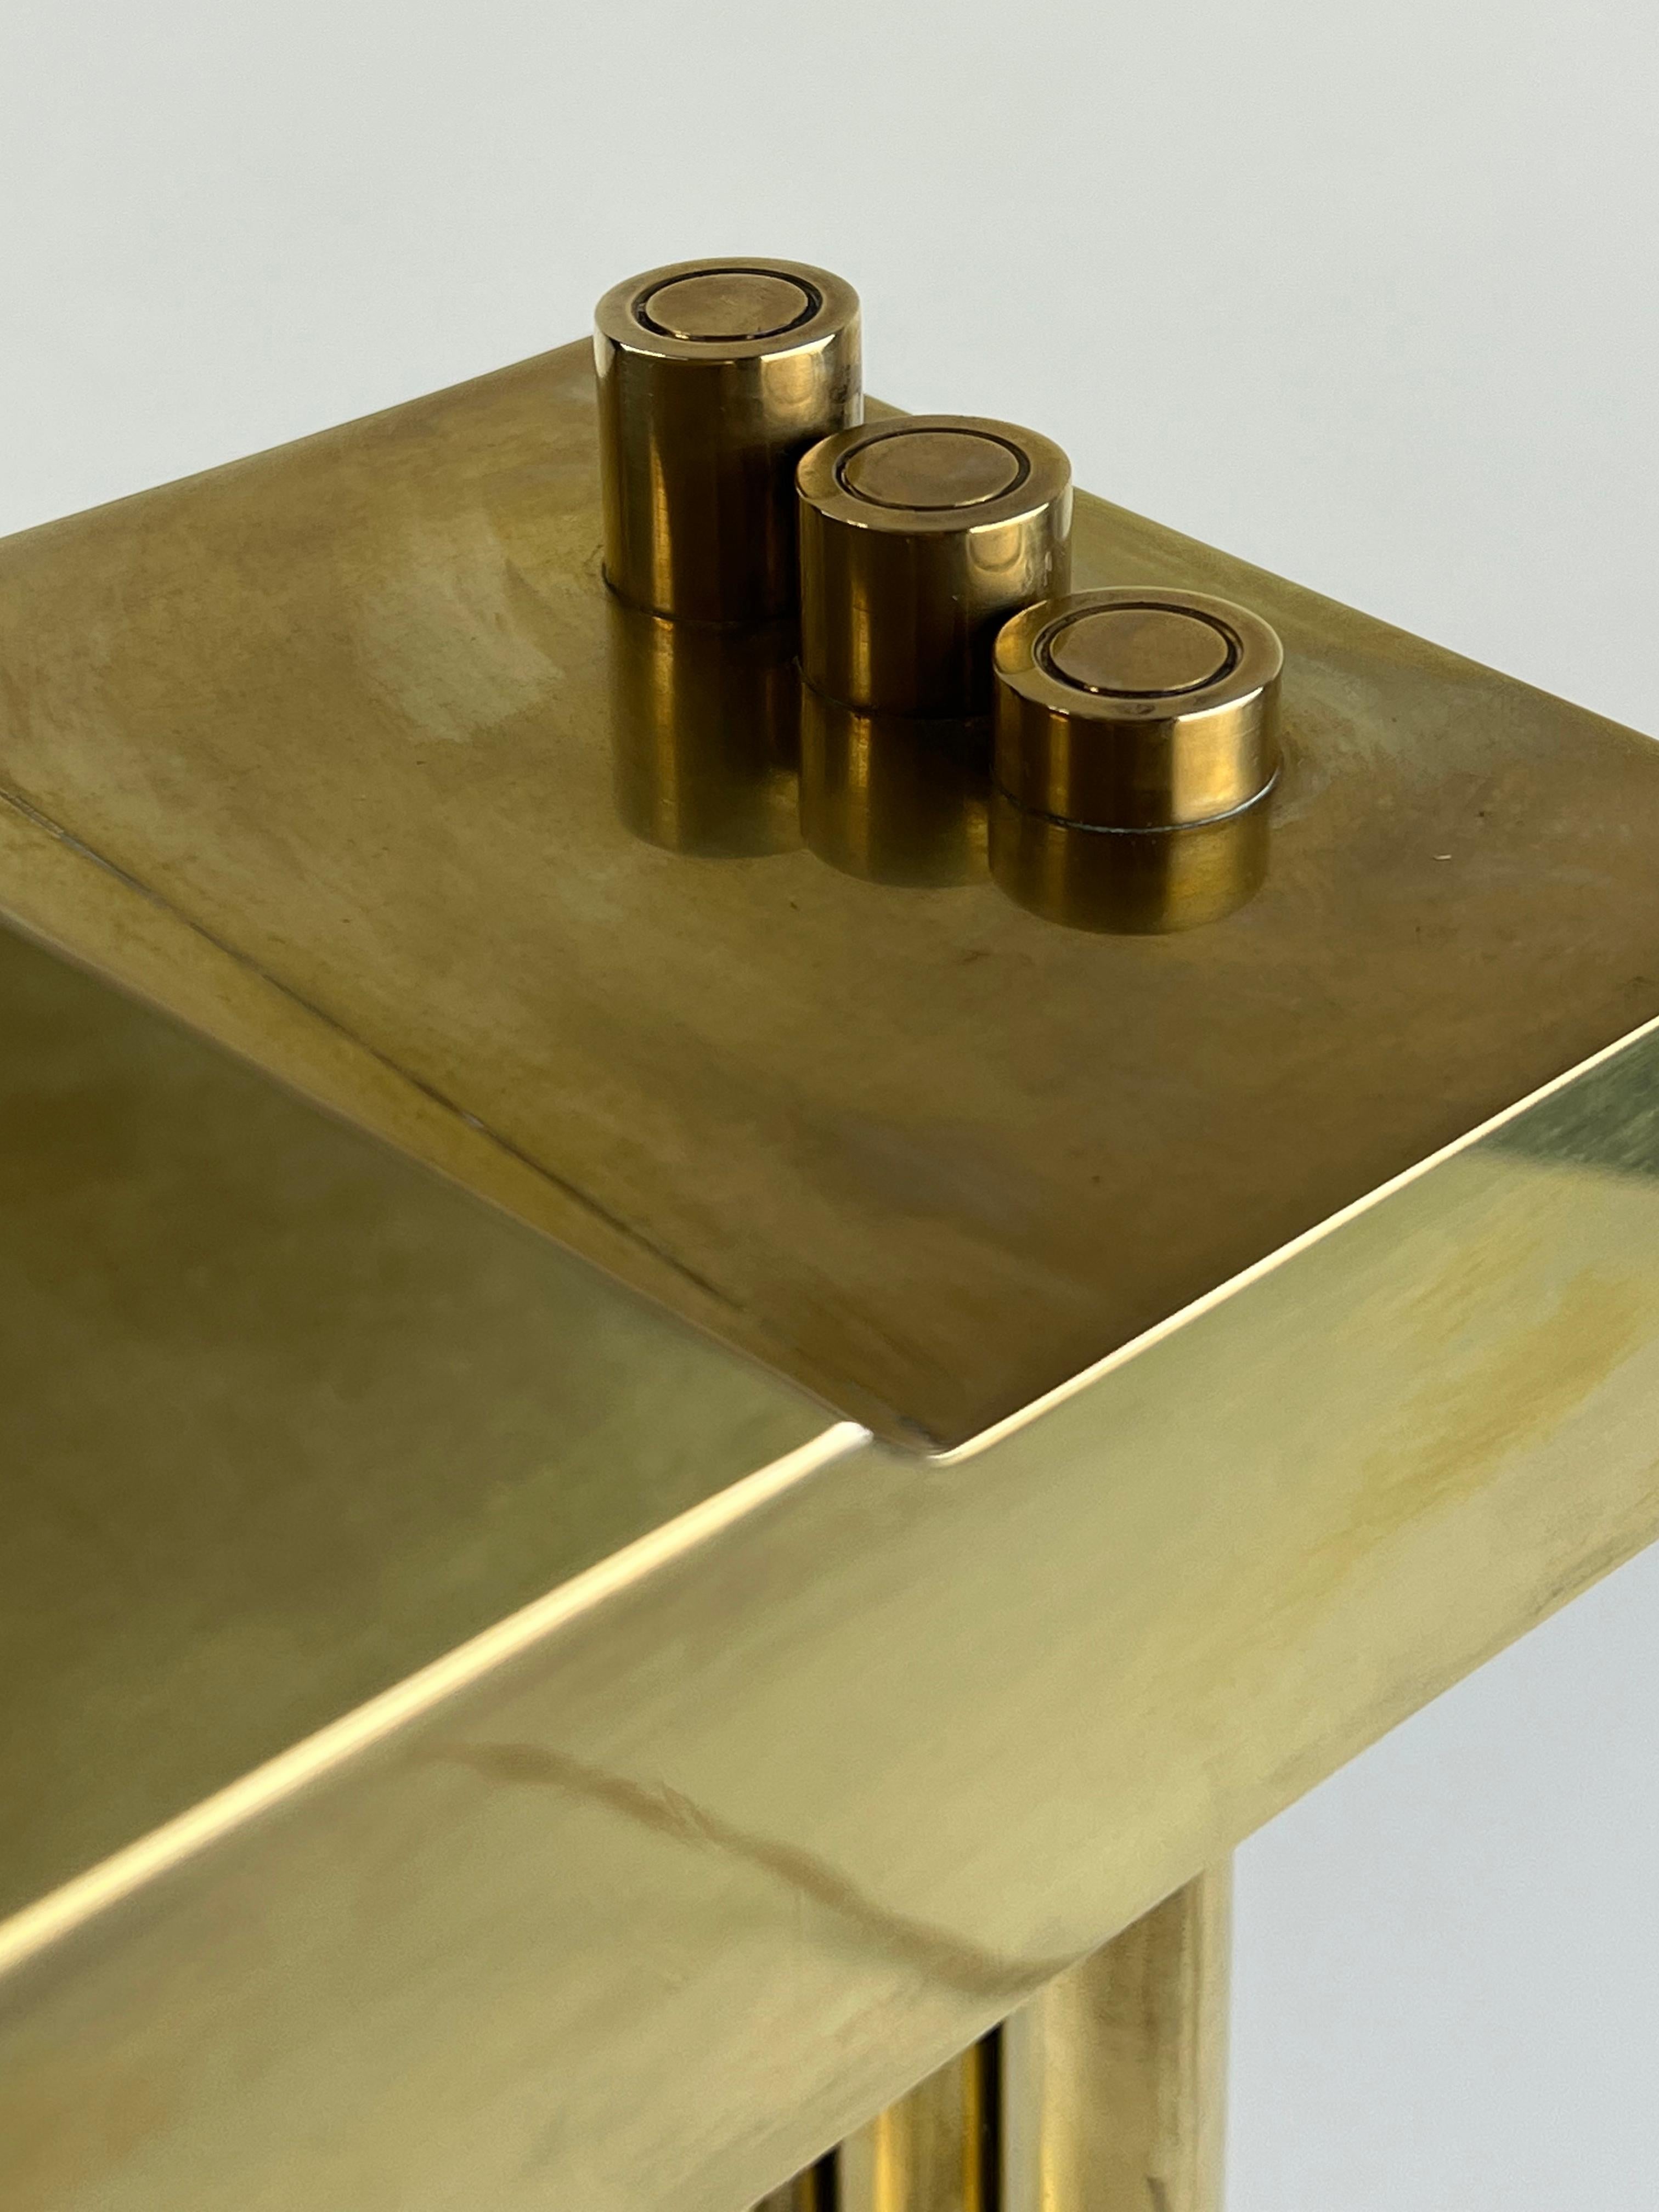 French Brass Table Lamp by Marcel Breuer, 1925, Marked